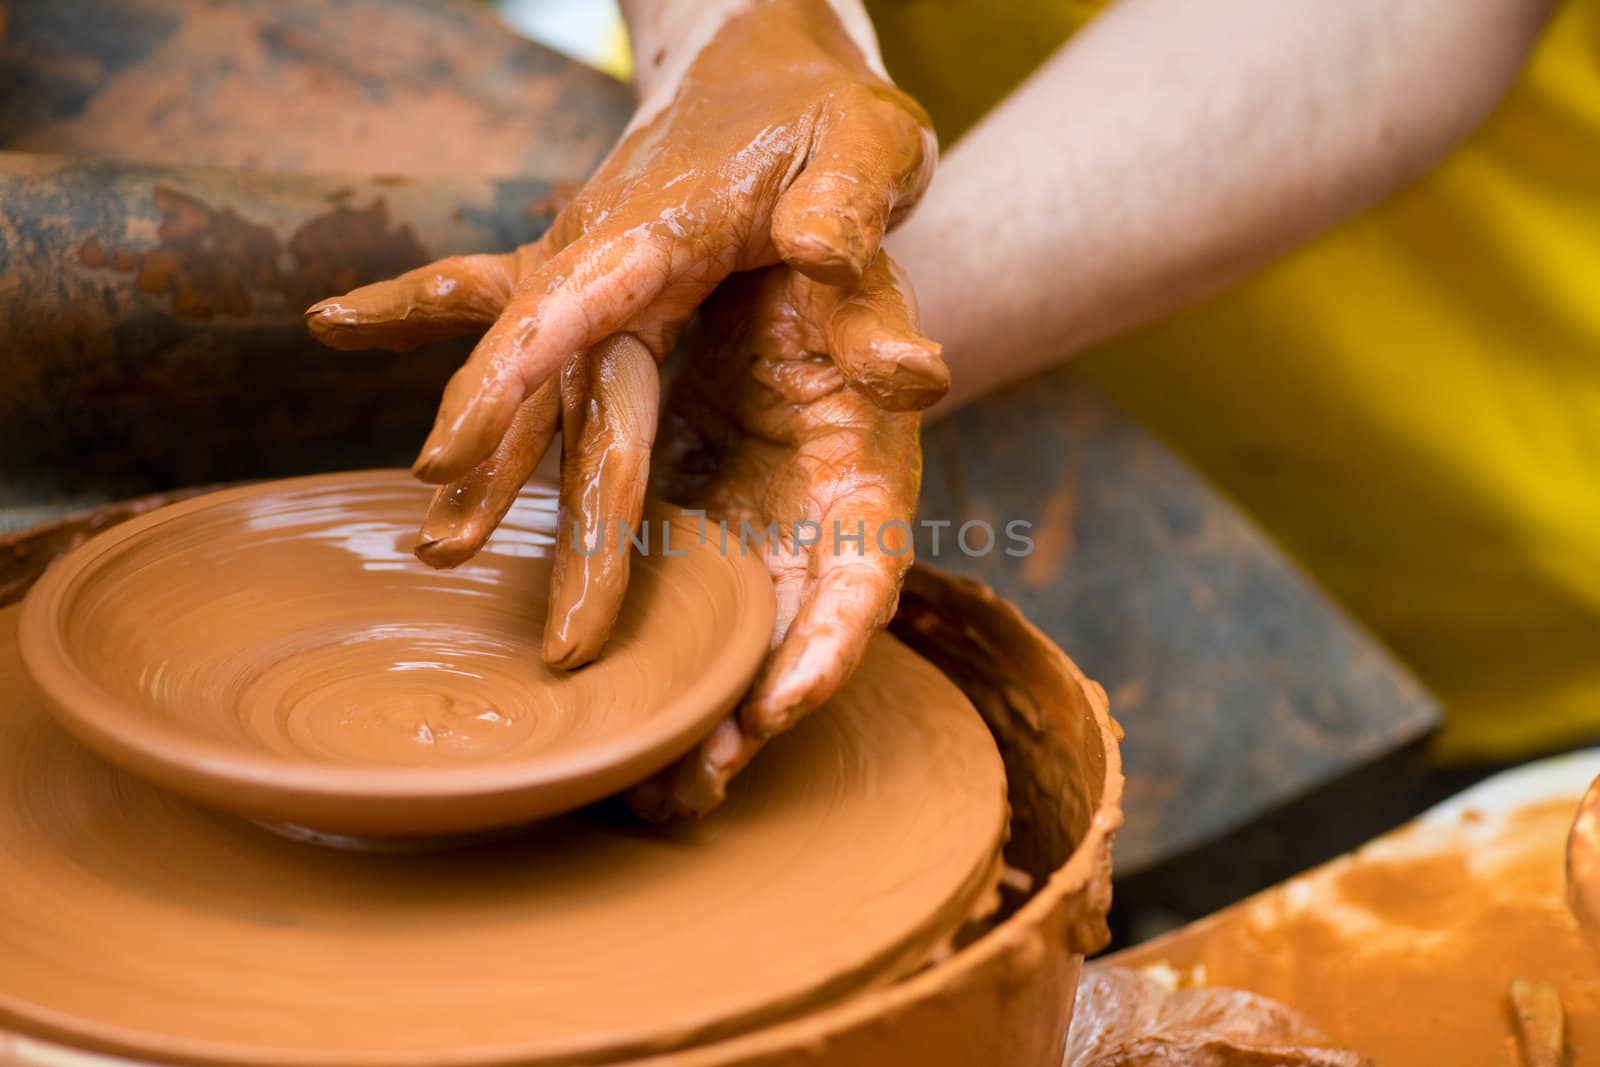 potter shaping a ceramic plate on a pottery wheel